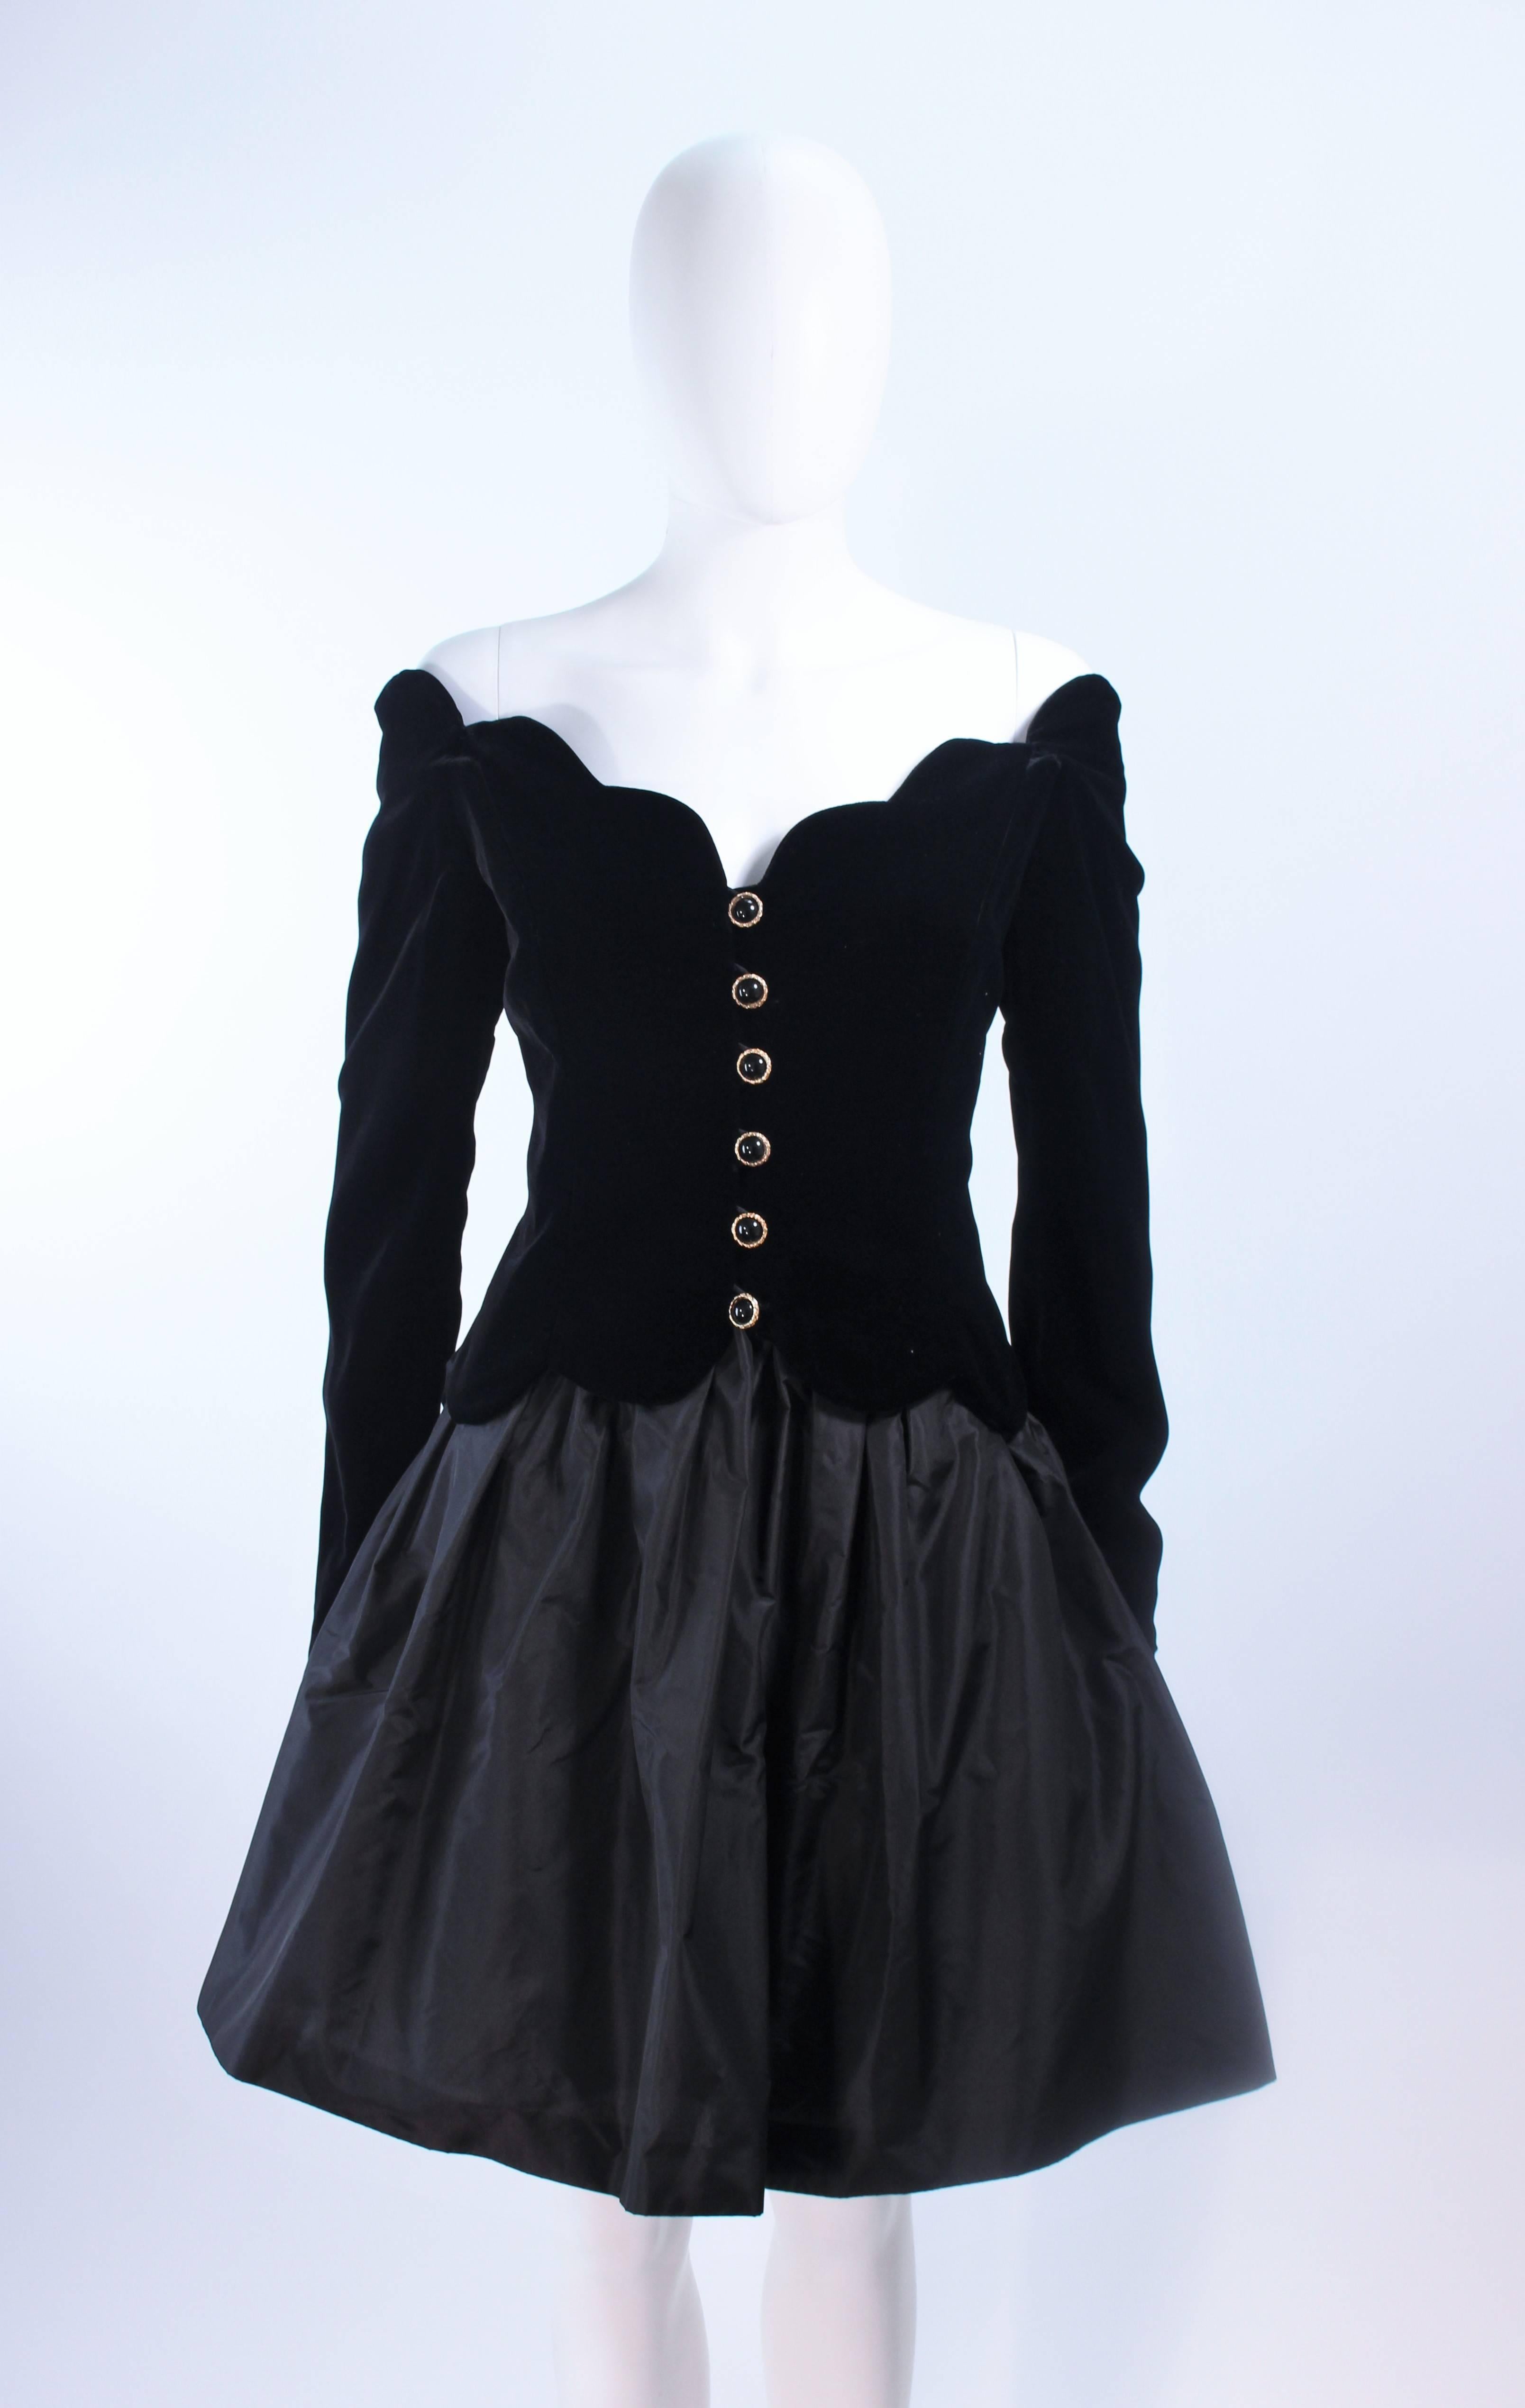 This Belville Sasson ensemble is composed of silk and velvet. Features an off the shoulder scalloped blouse and a taffeta skirt. There are center front buttons on the blouse and a zipper closure on the skirt. In excellent vintage